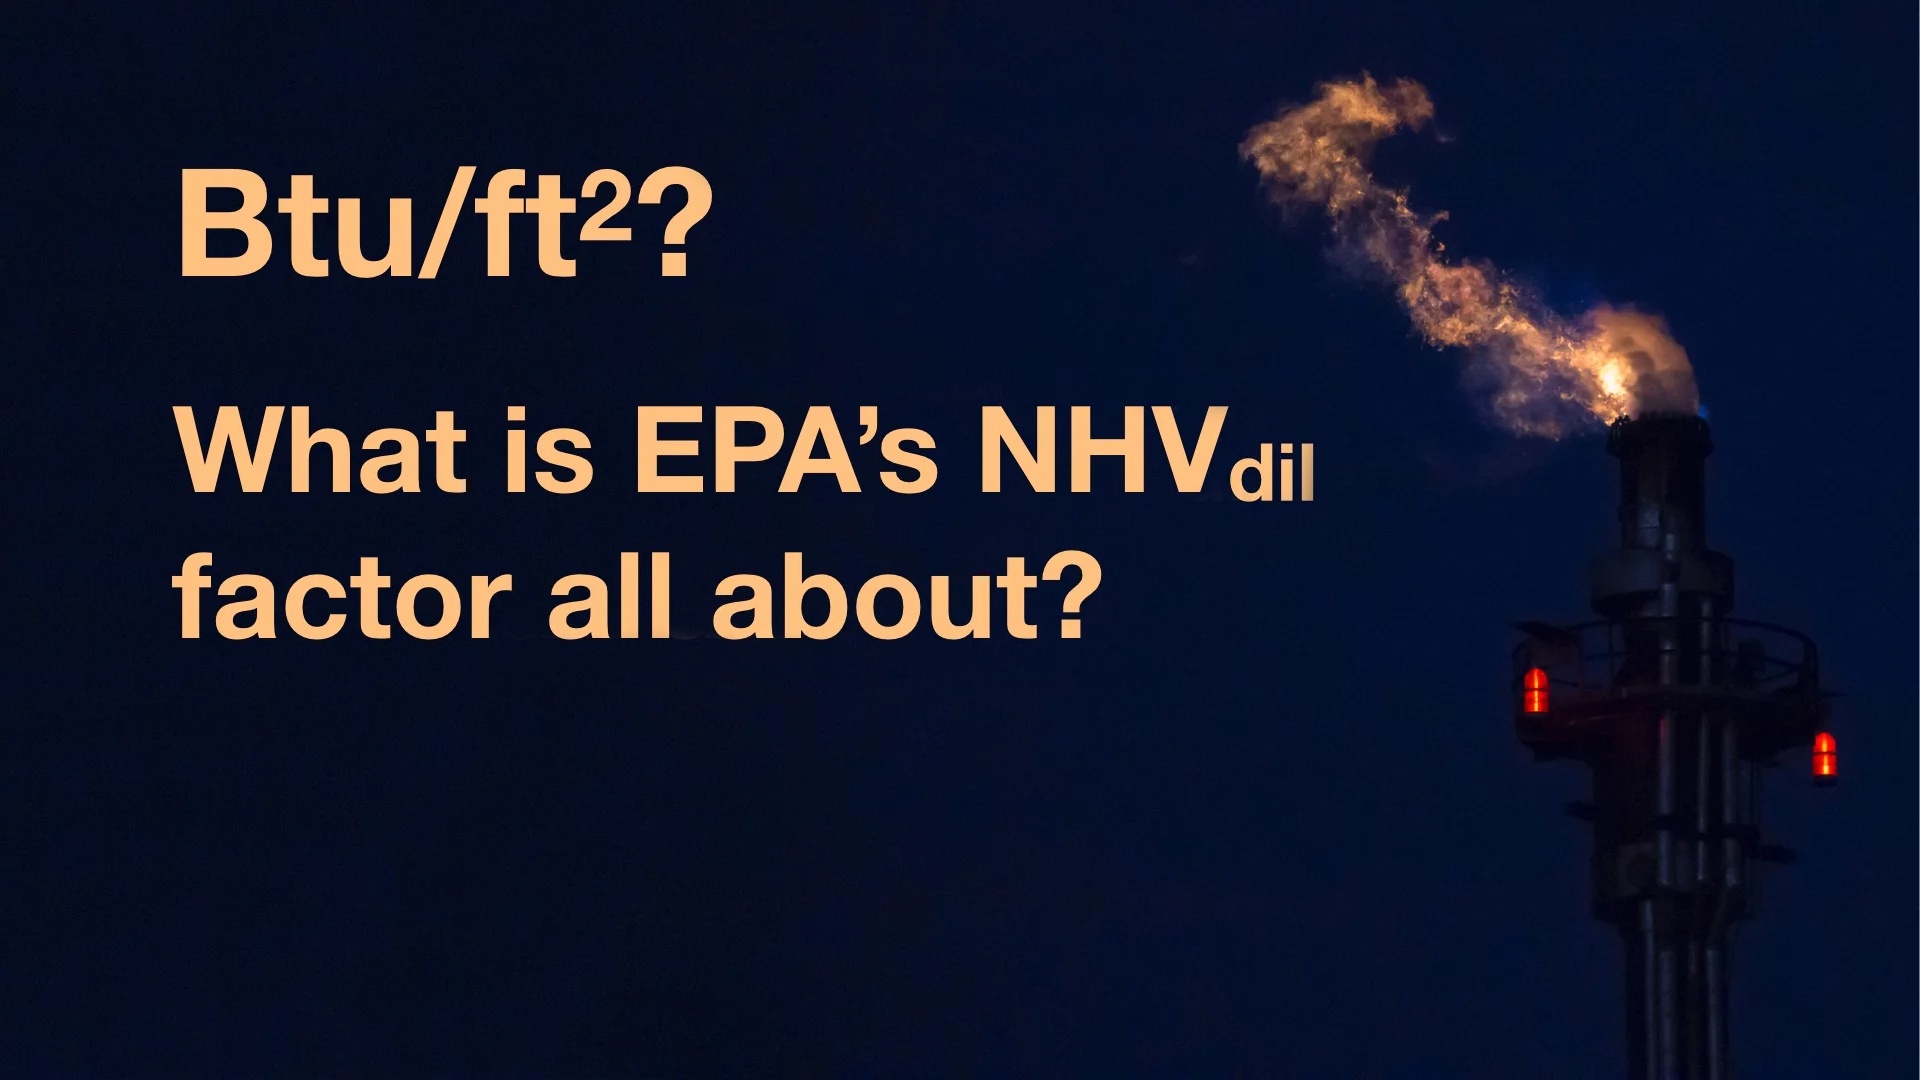 Btu per SQUARE FOOT? What the heck is EPA’s Flare Dilution Factor?